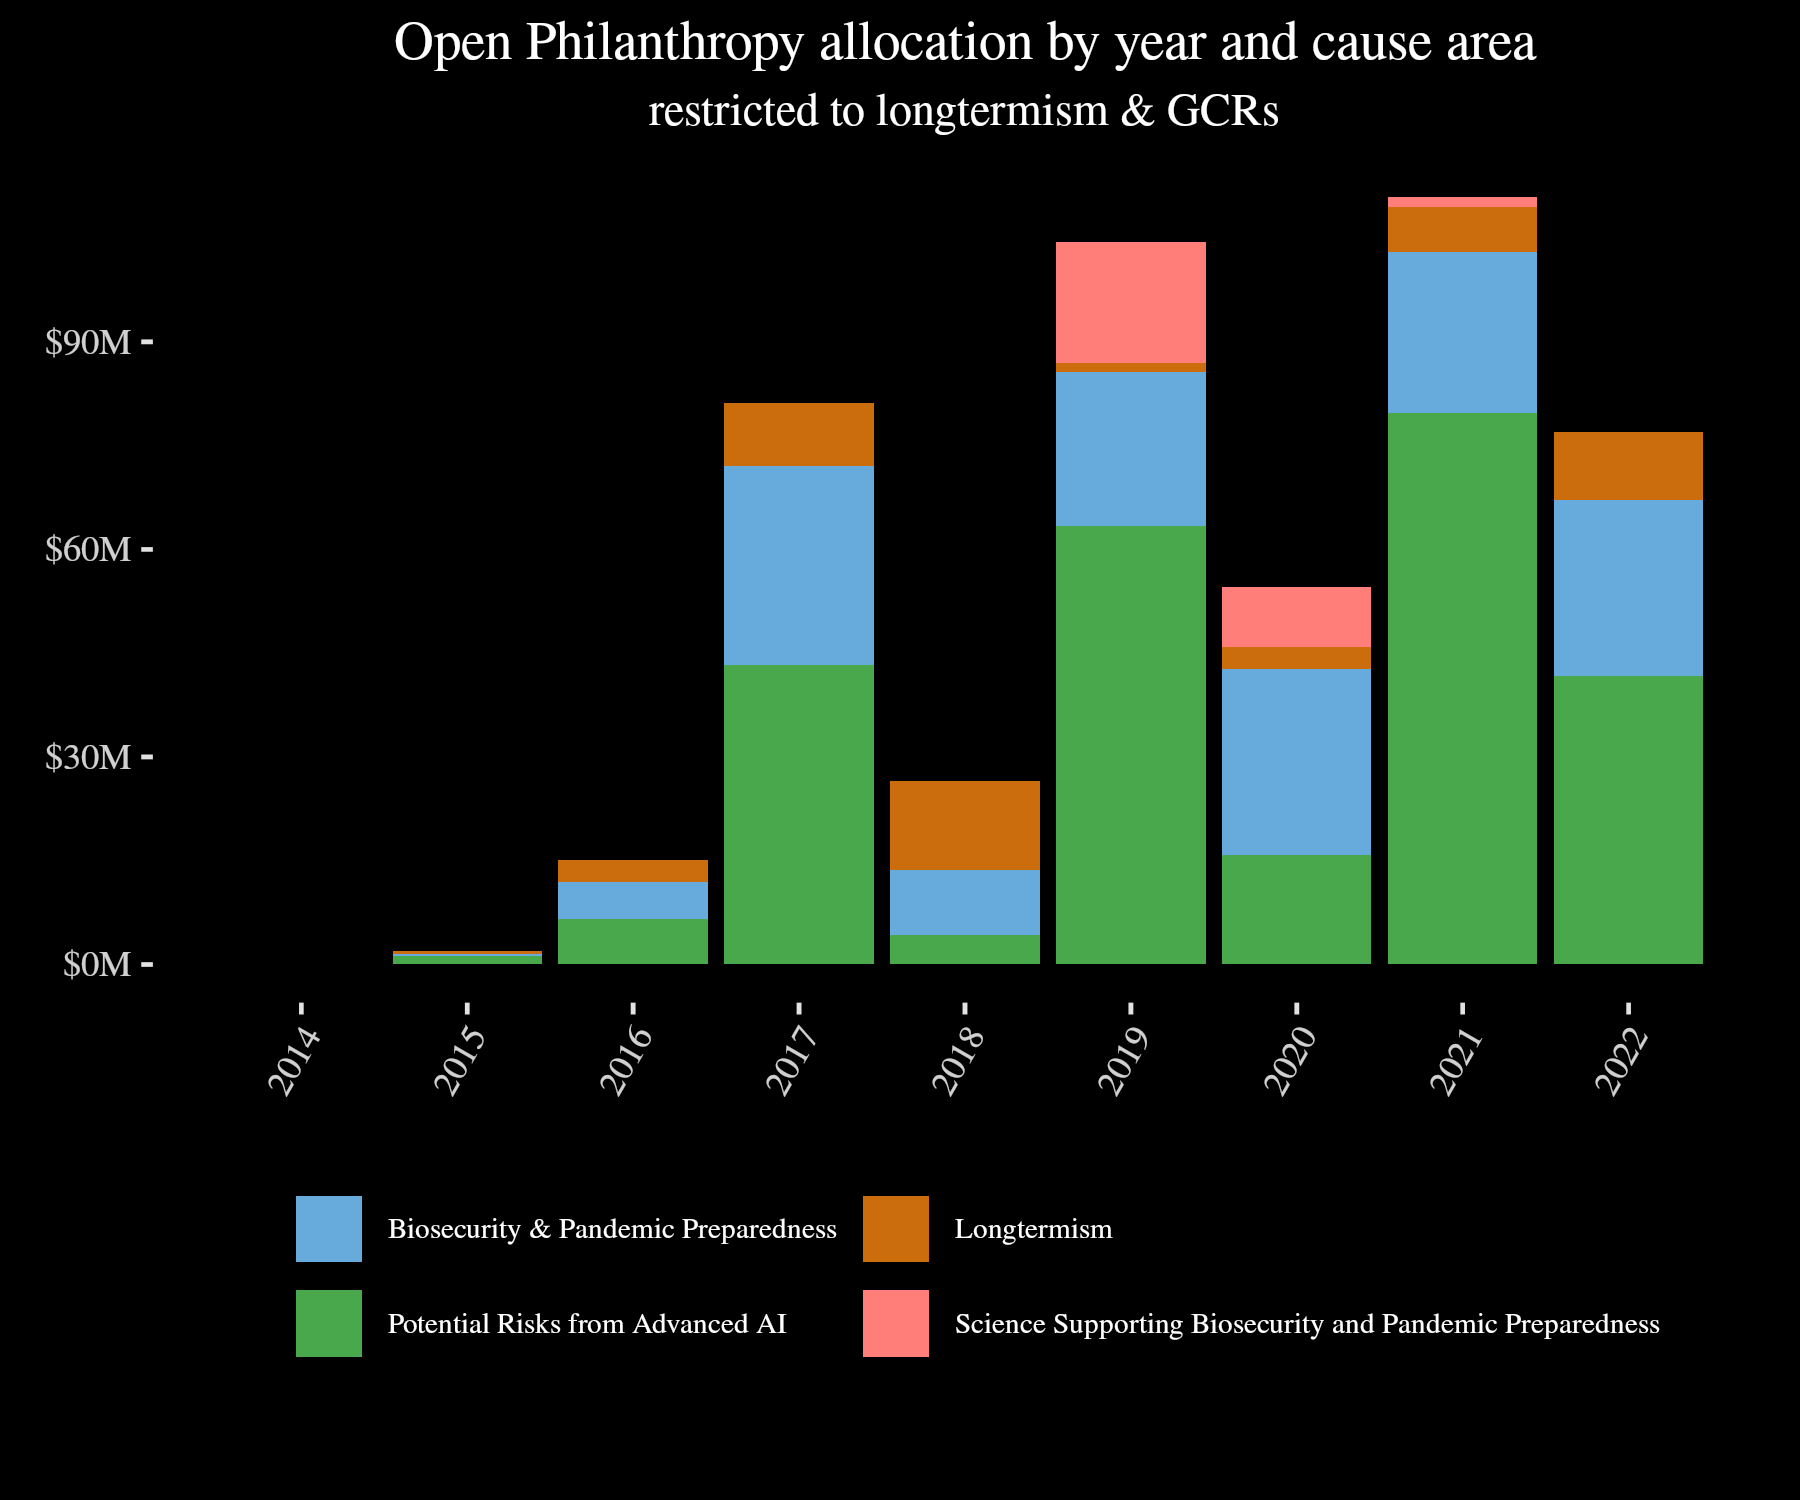 Bar graph of OpenPhil allocation to catastrophic risks by year. AI leads most years, followed by biosecurity.